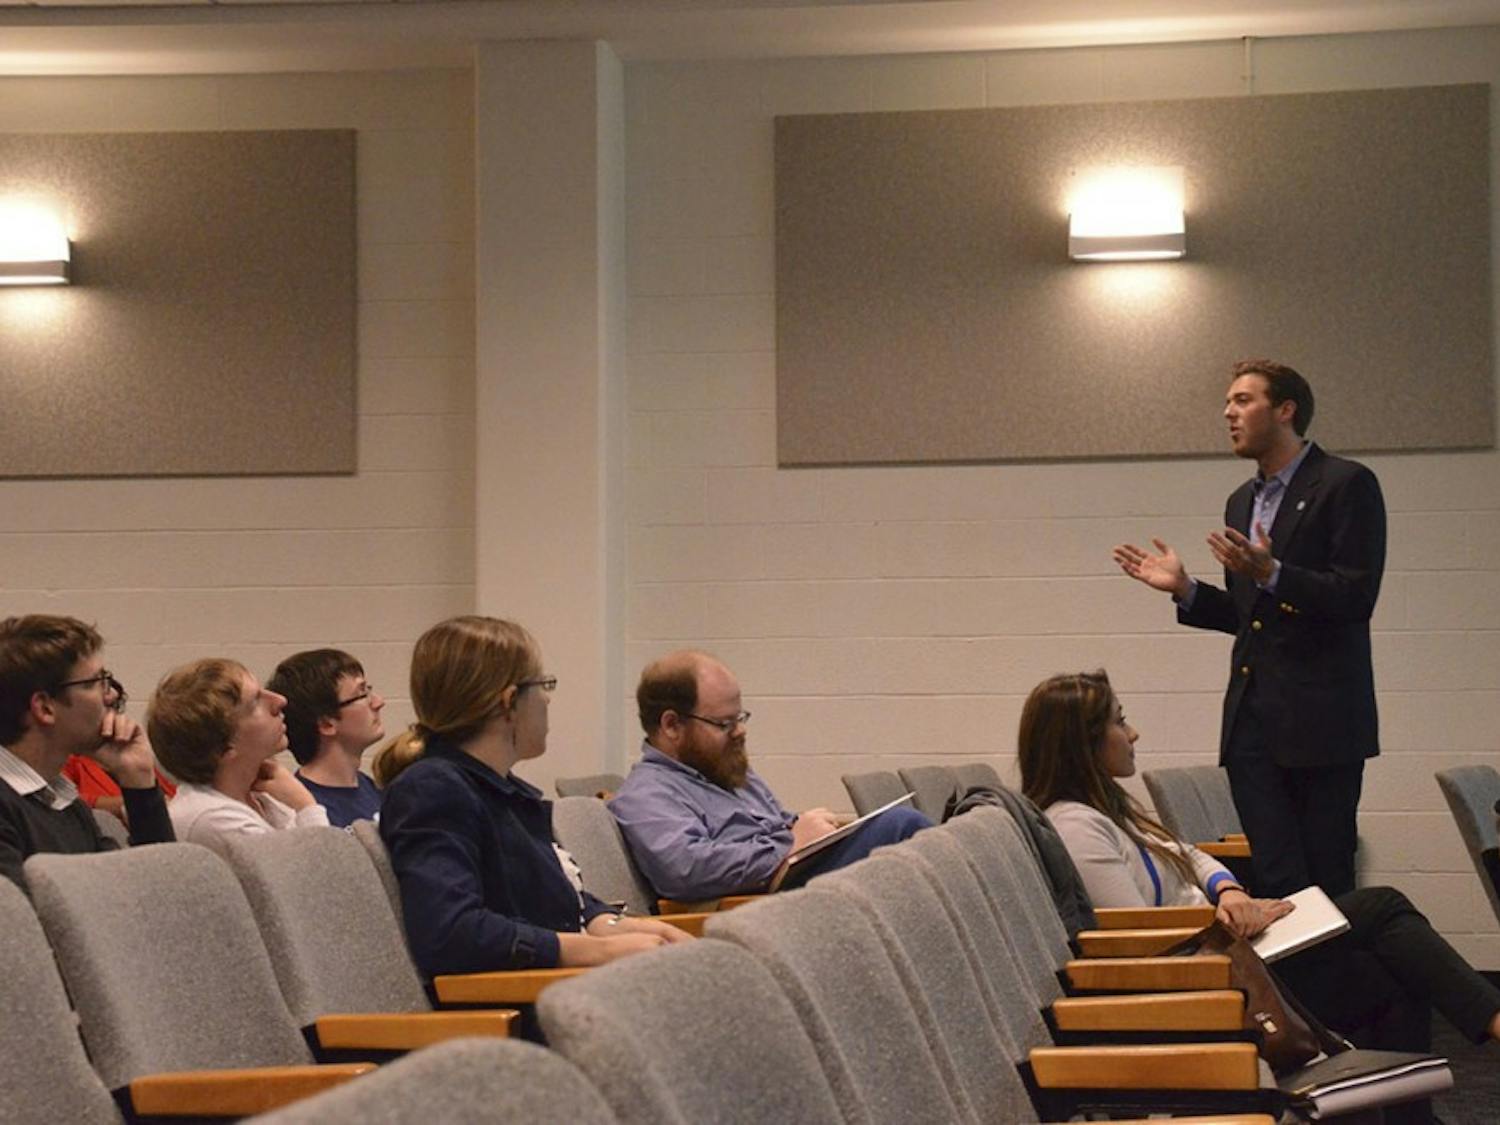 Dylan Russell, president of the Graduate and Professional Student Federation, updates members on their proposed separation from Student Congress on Tuesday in Rosenau Hall at the Gillings School of Global Public Health.